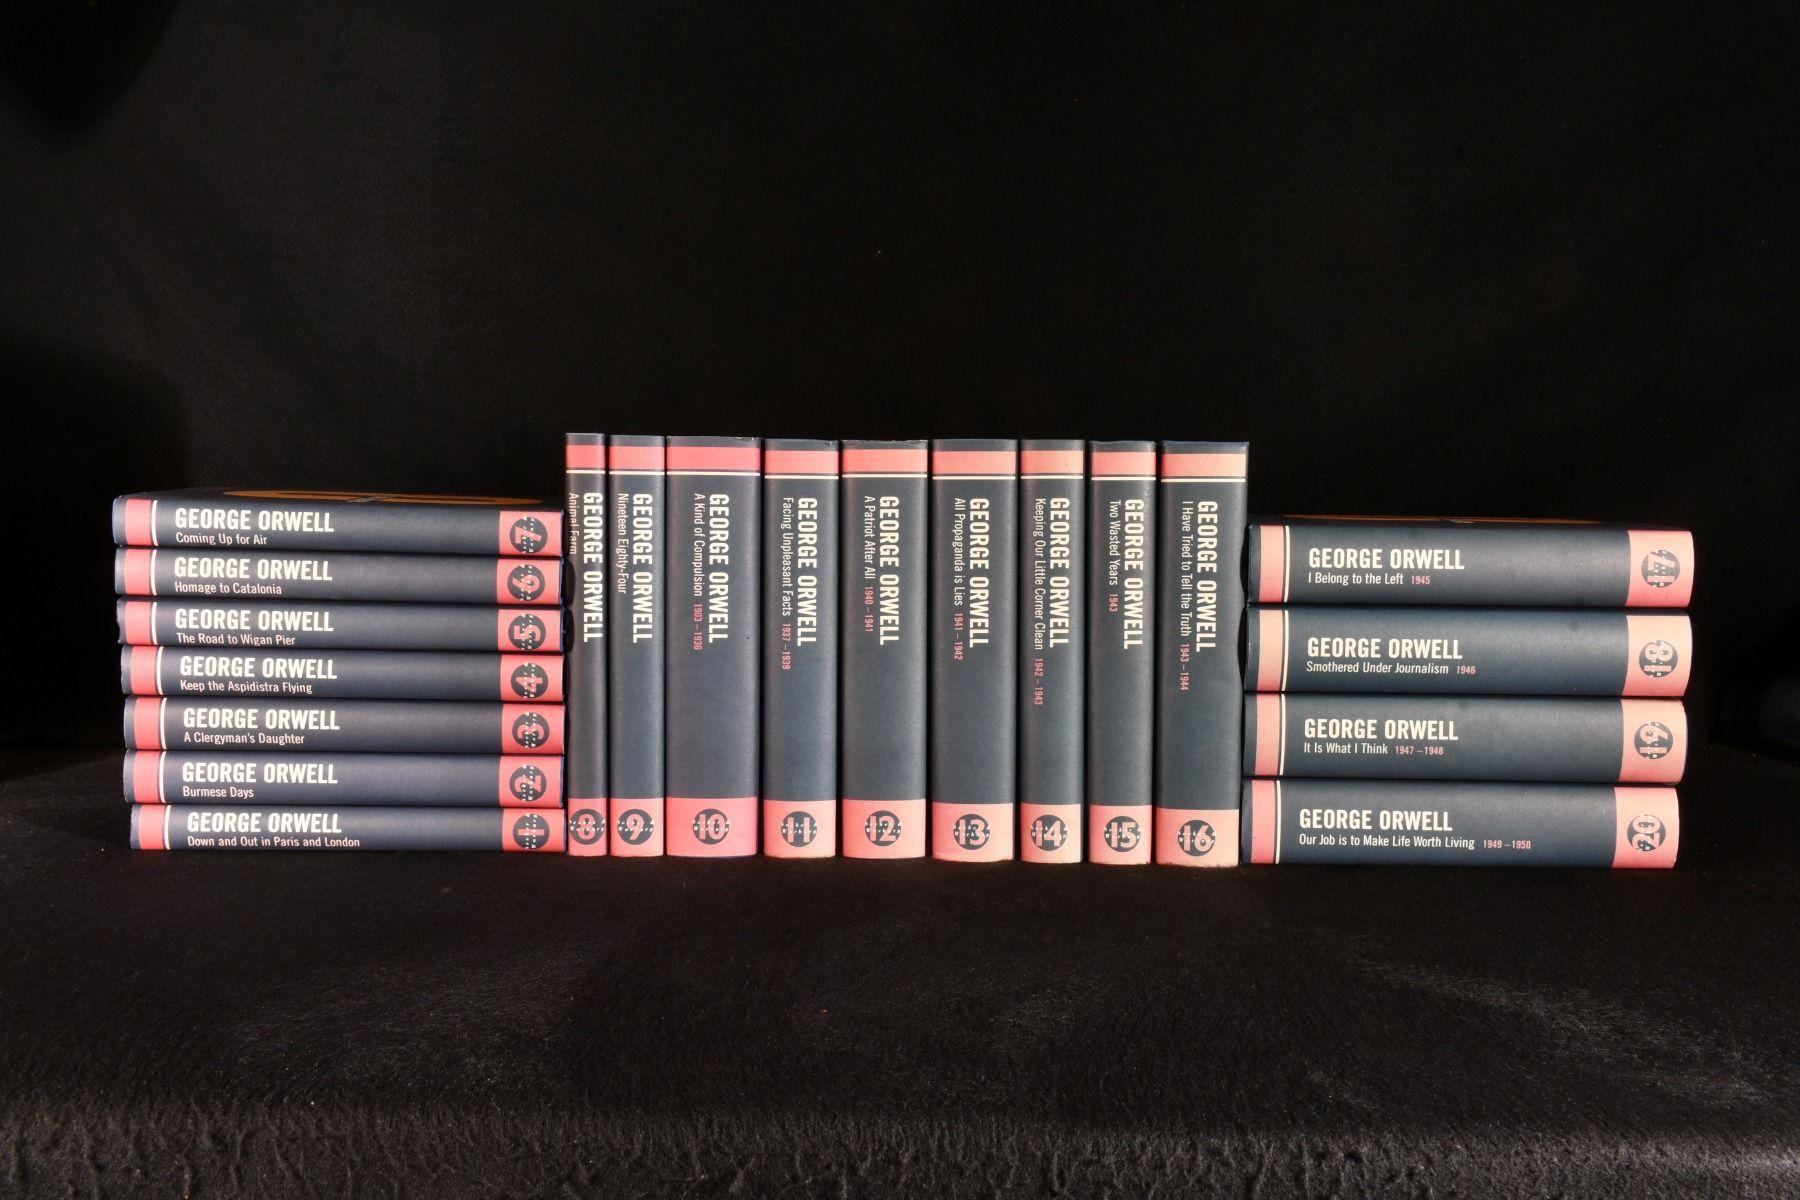 A striking complete set of the works of George Orwell, a sought after collection of both his fiction and non-fiction.

Complete in twenty volumes.

The complete works of George Orwell, containing both his fiction and non-fiction writings, a